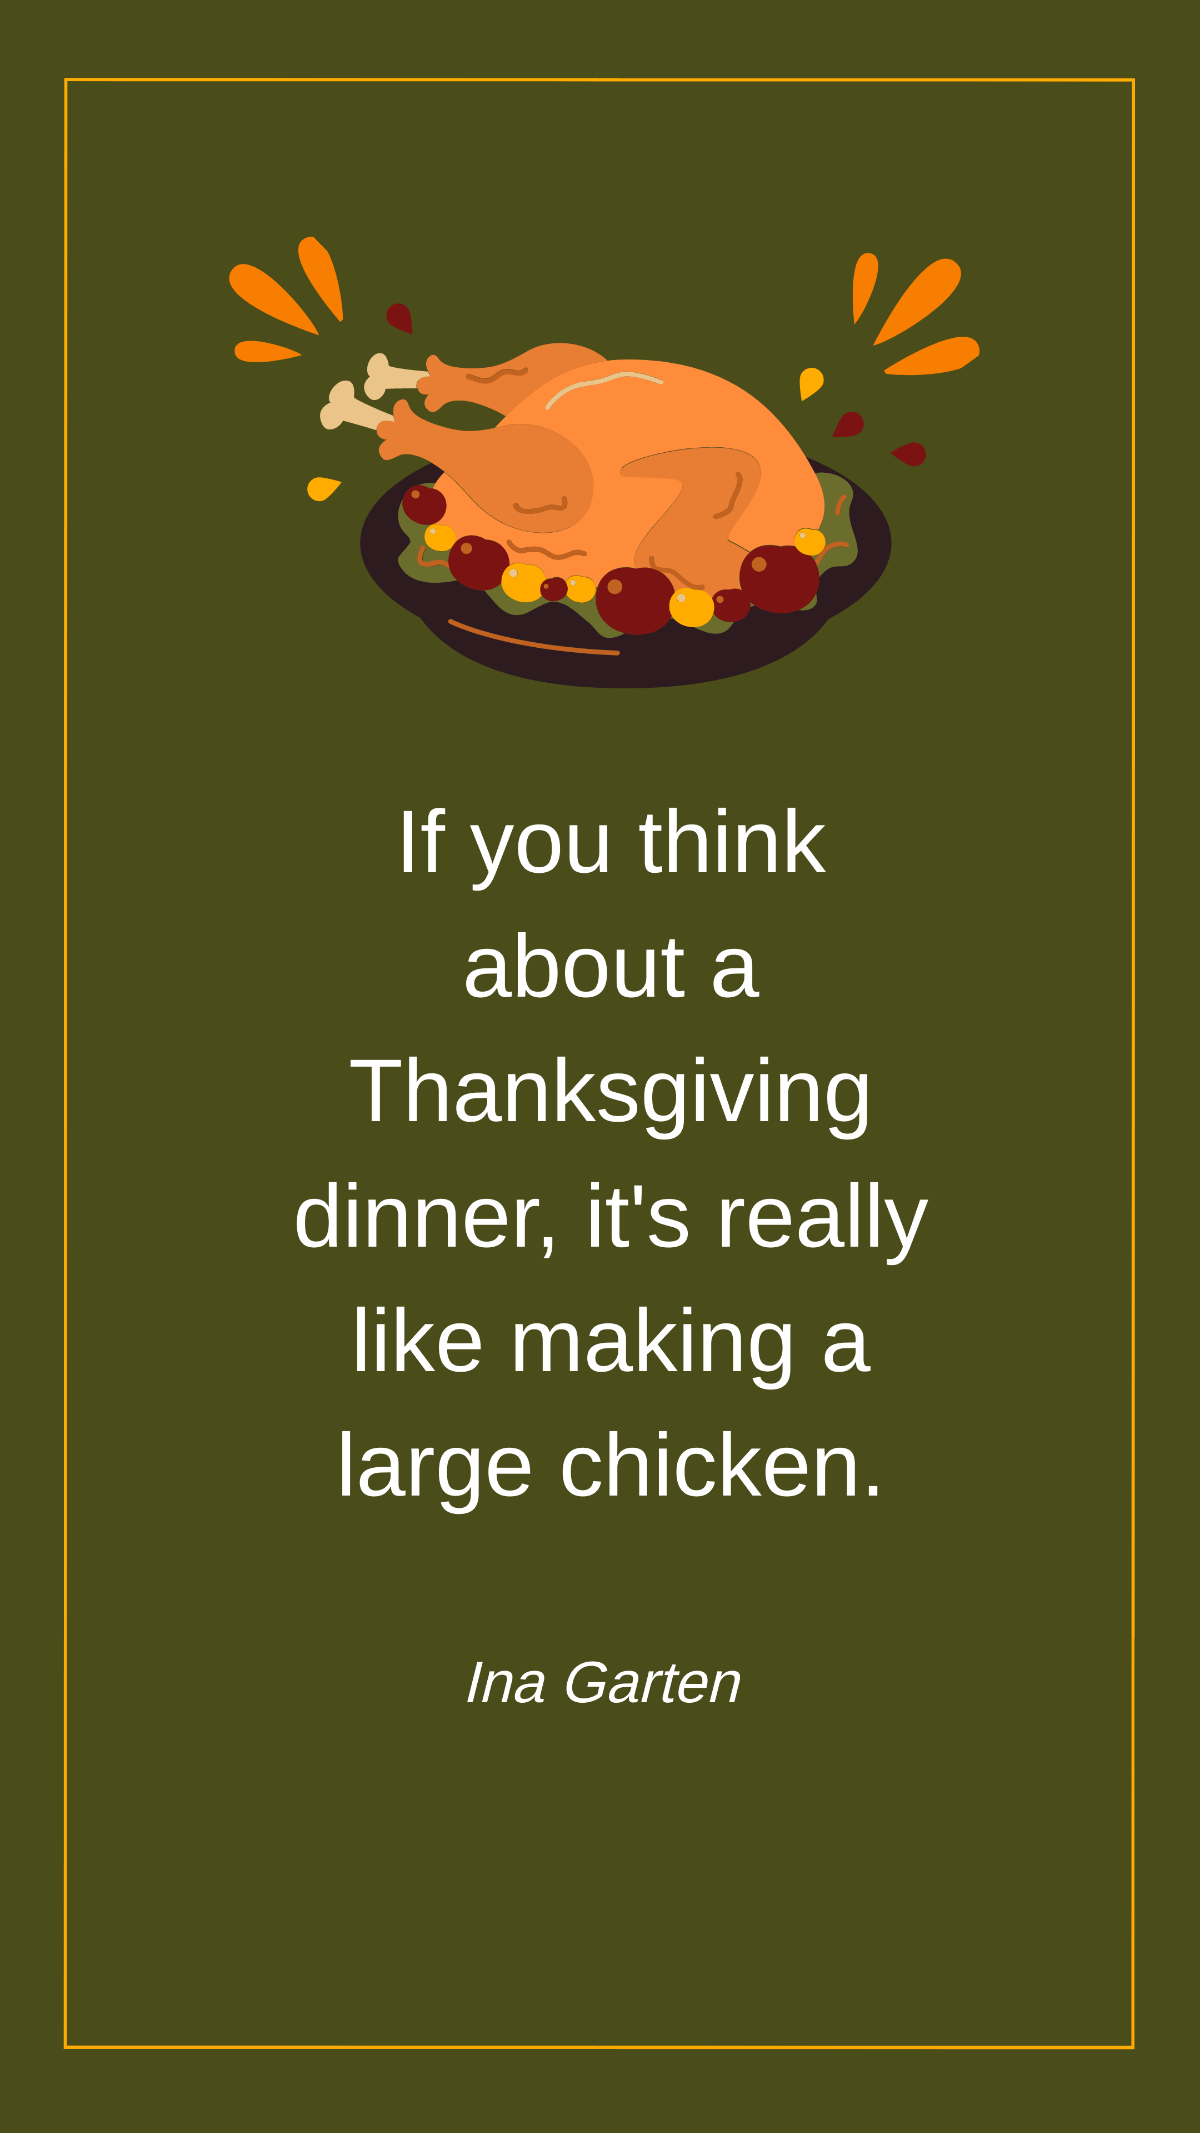 Ina Garten - If you think about a Thanksgiving dinner, it's really like making a large chicken. Template